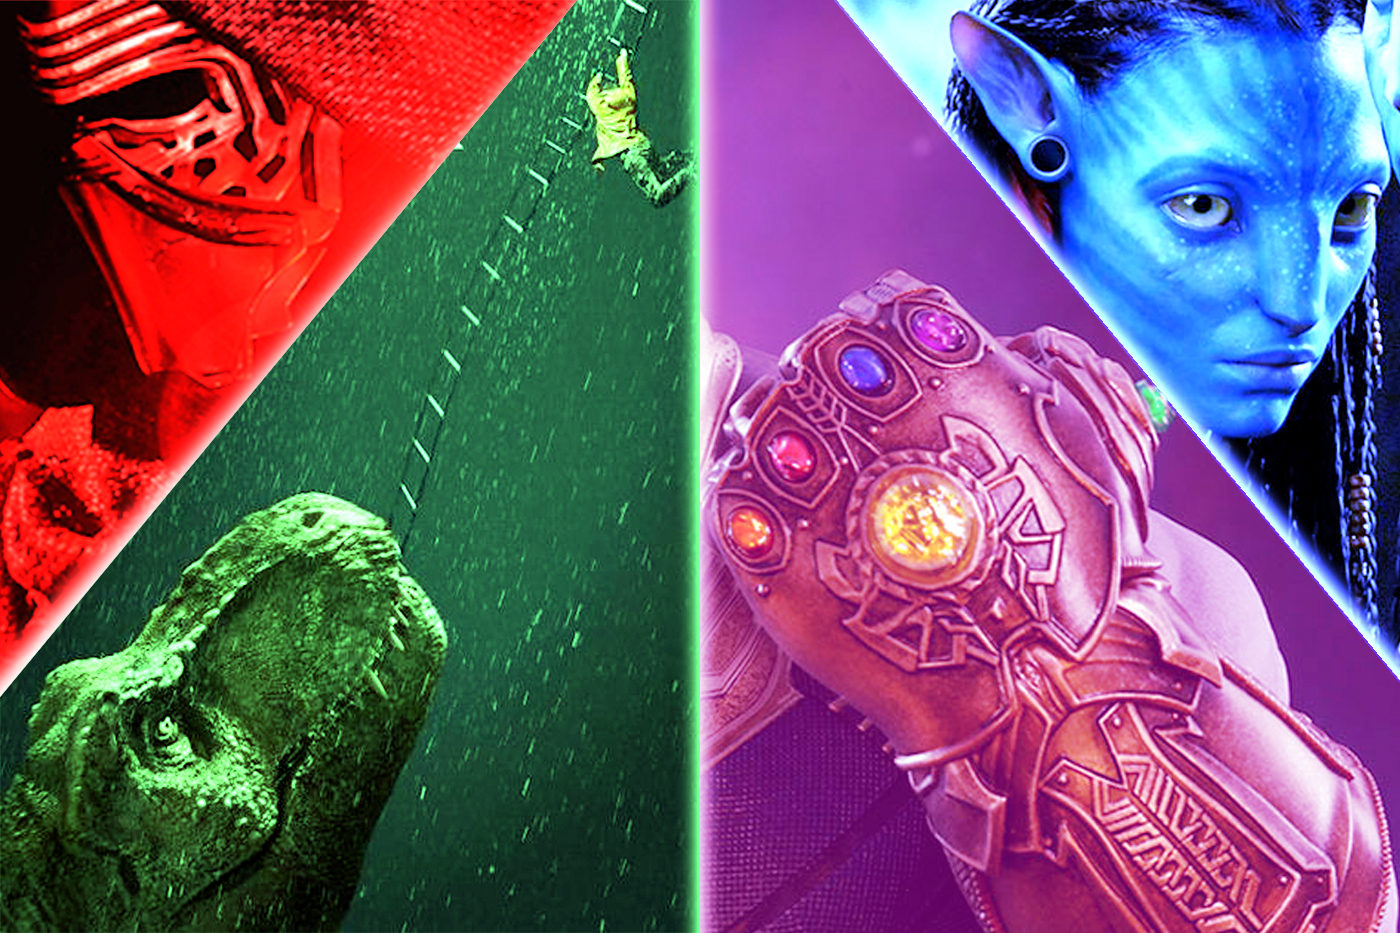 Avengers, Jurassic World, and Star Wars: A road map to the top 100 grossing movies of all time